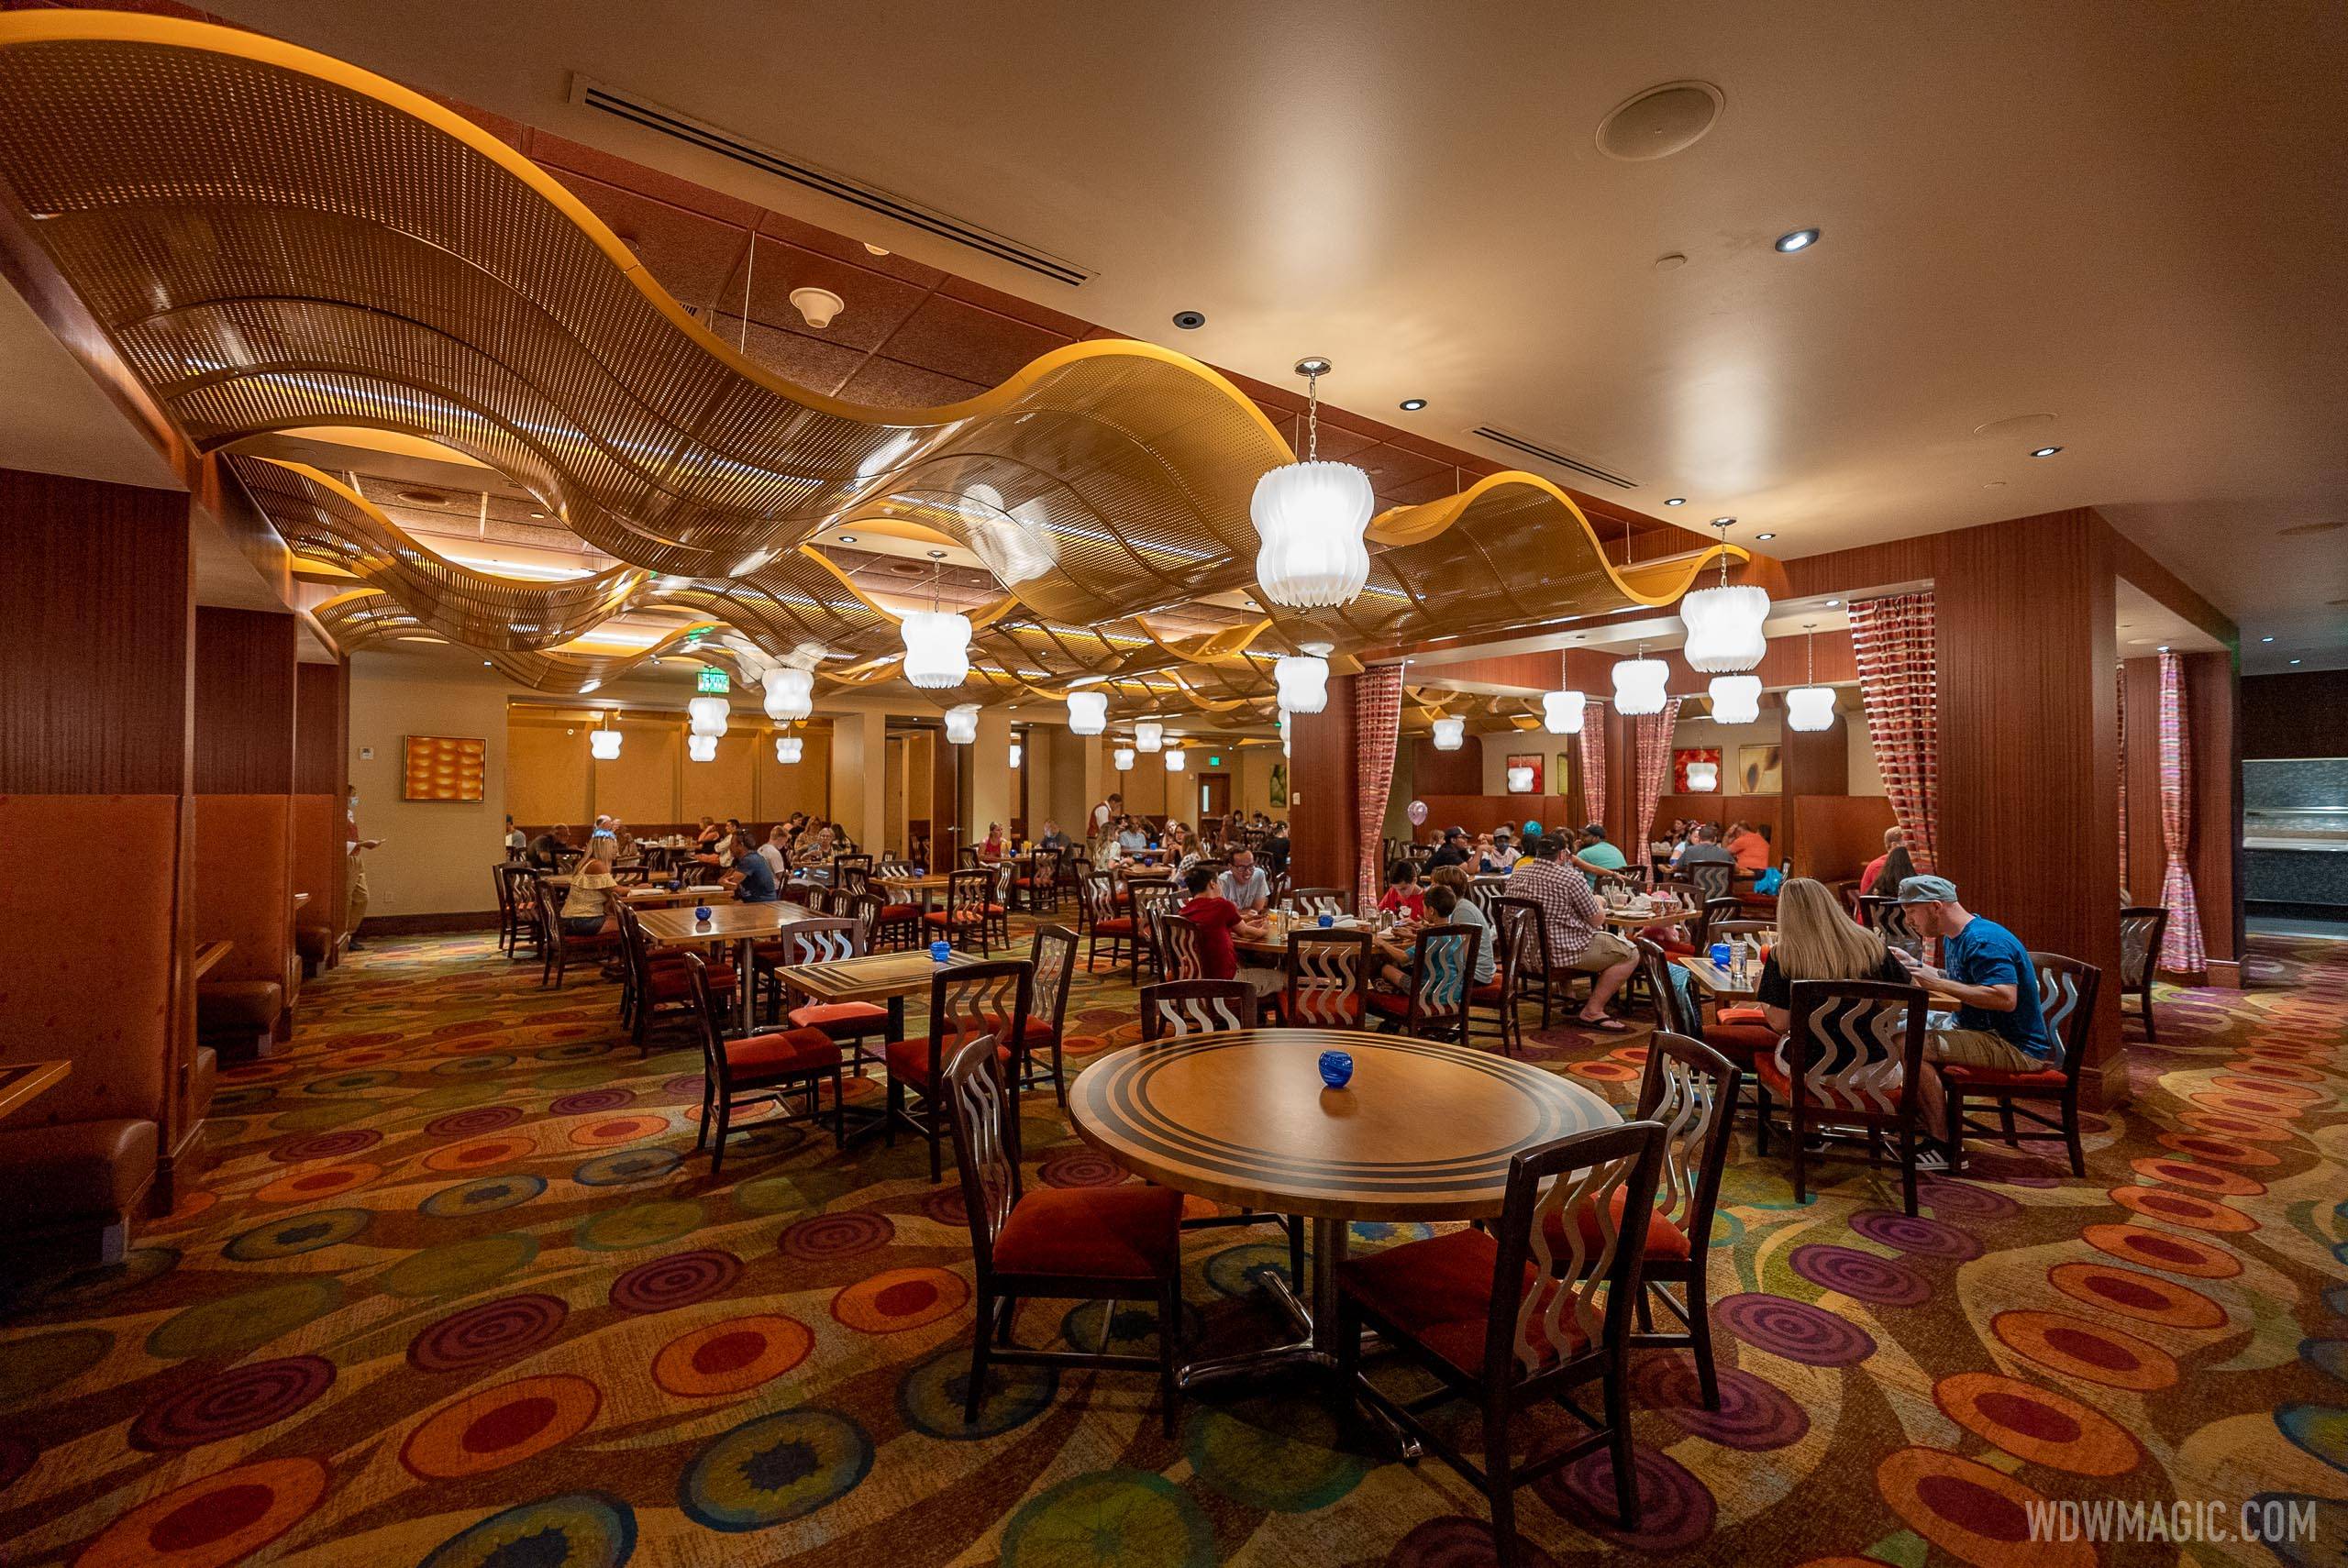 The Wave closing for refurbishment this summer at Disney's Contemporary Resort